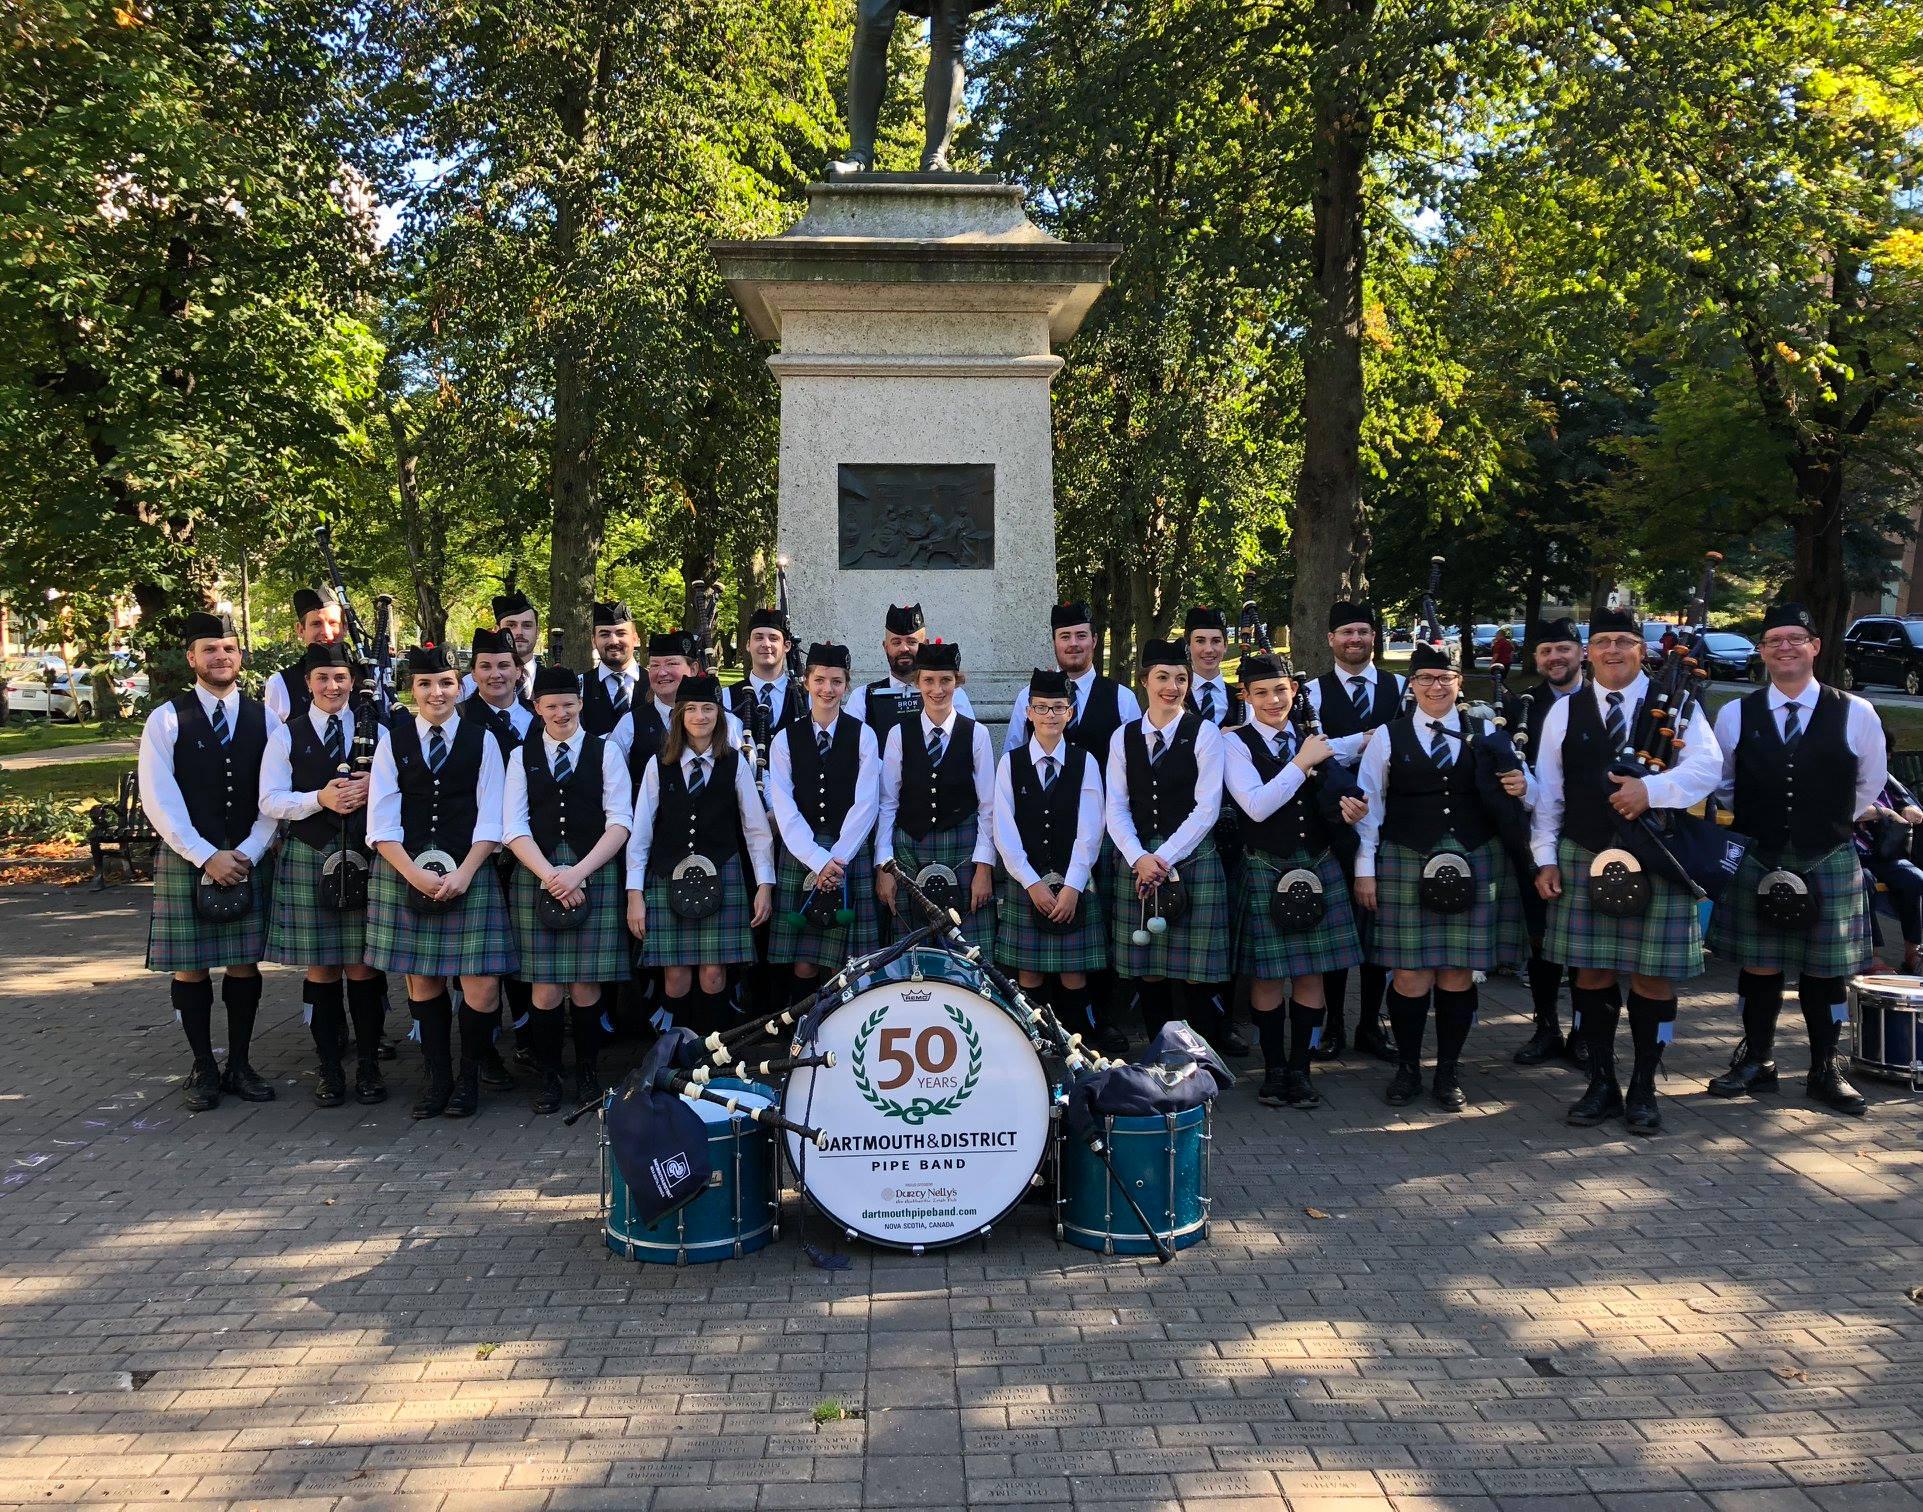 Dartmouth & District Pipe Band